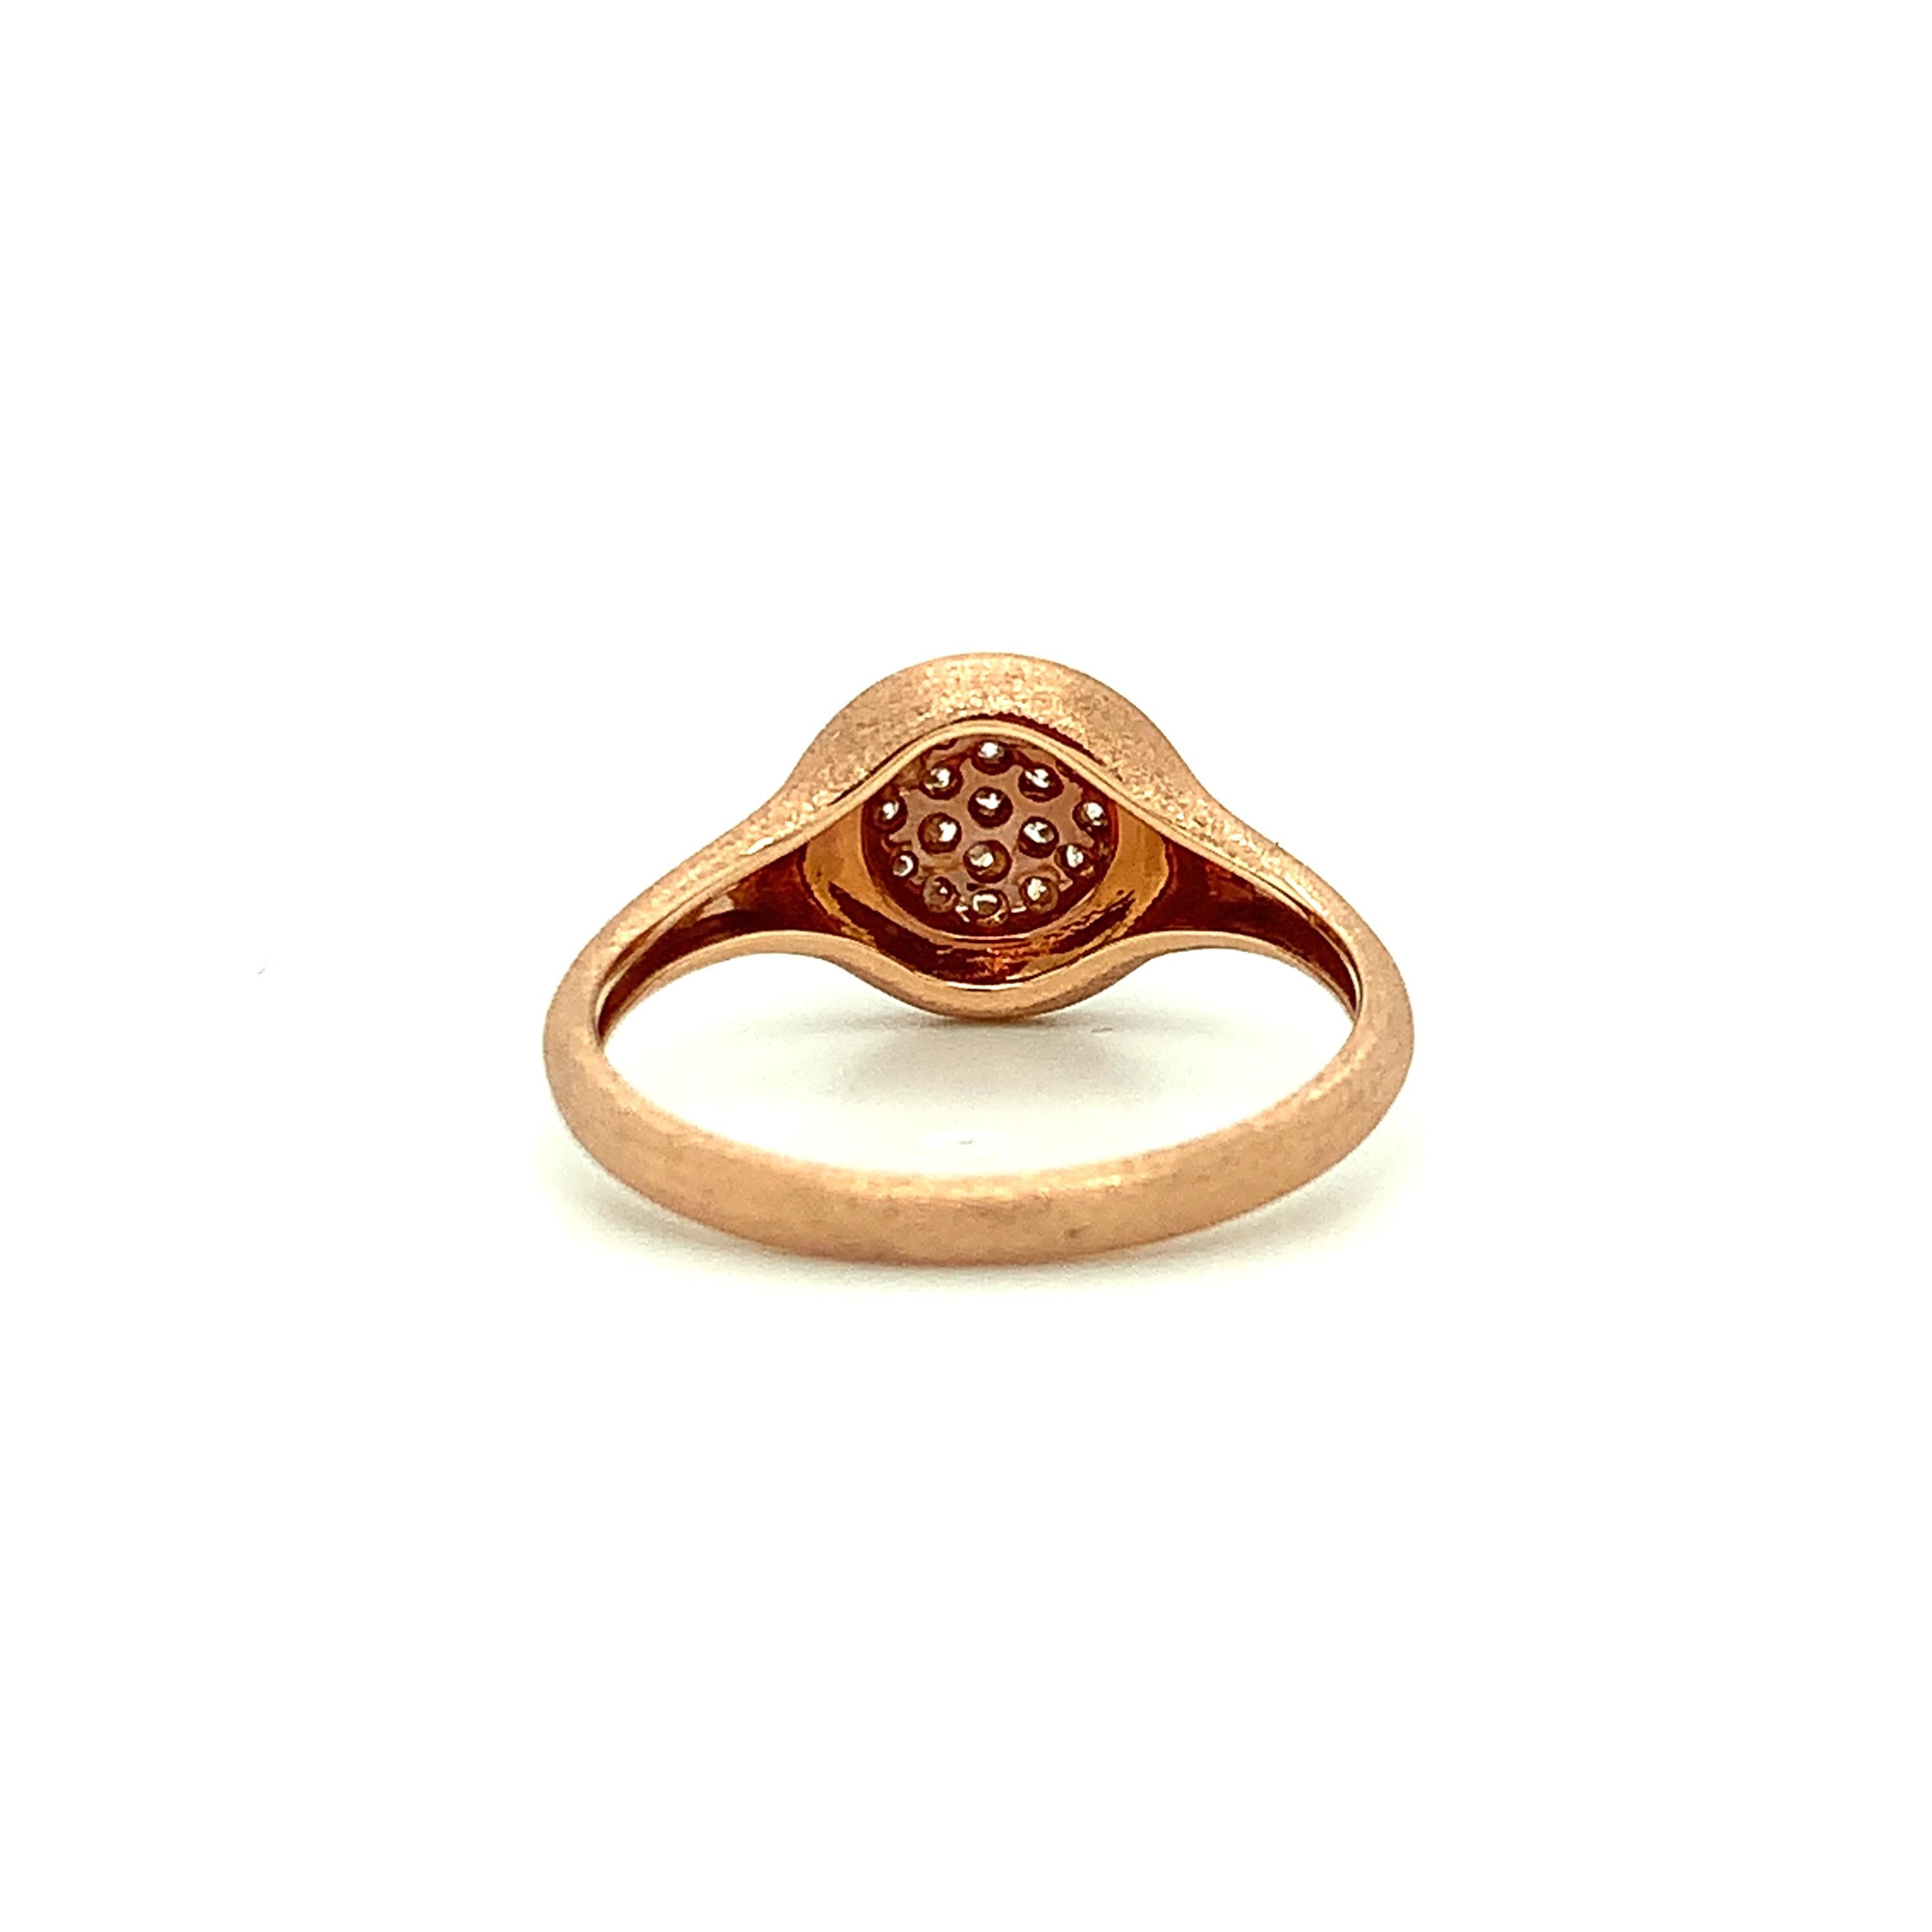 Diamond Pave Cocktail Ring in White and Brushed Rose Gold, .22 Carat Total In New Condition For Sale In Los Angeles, CA